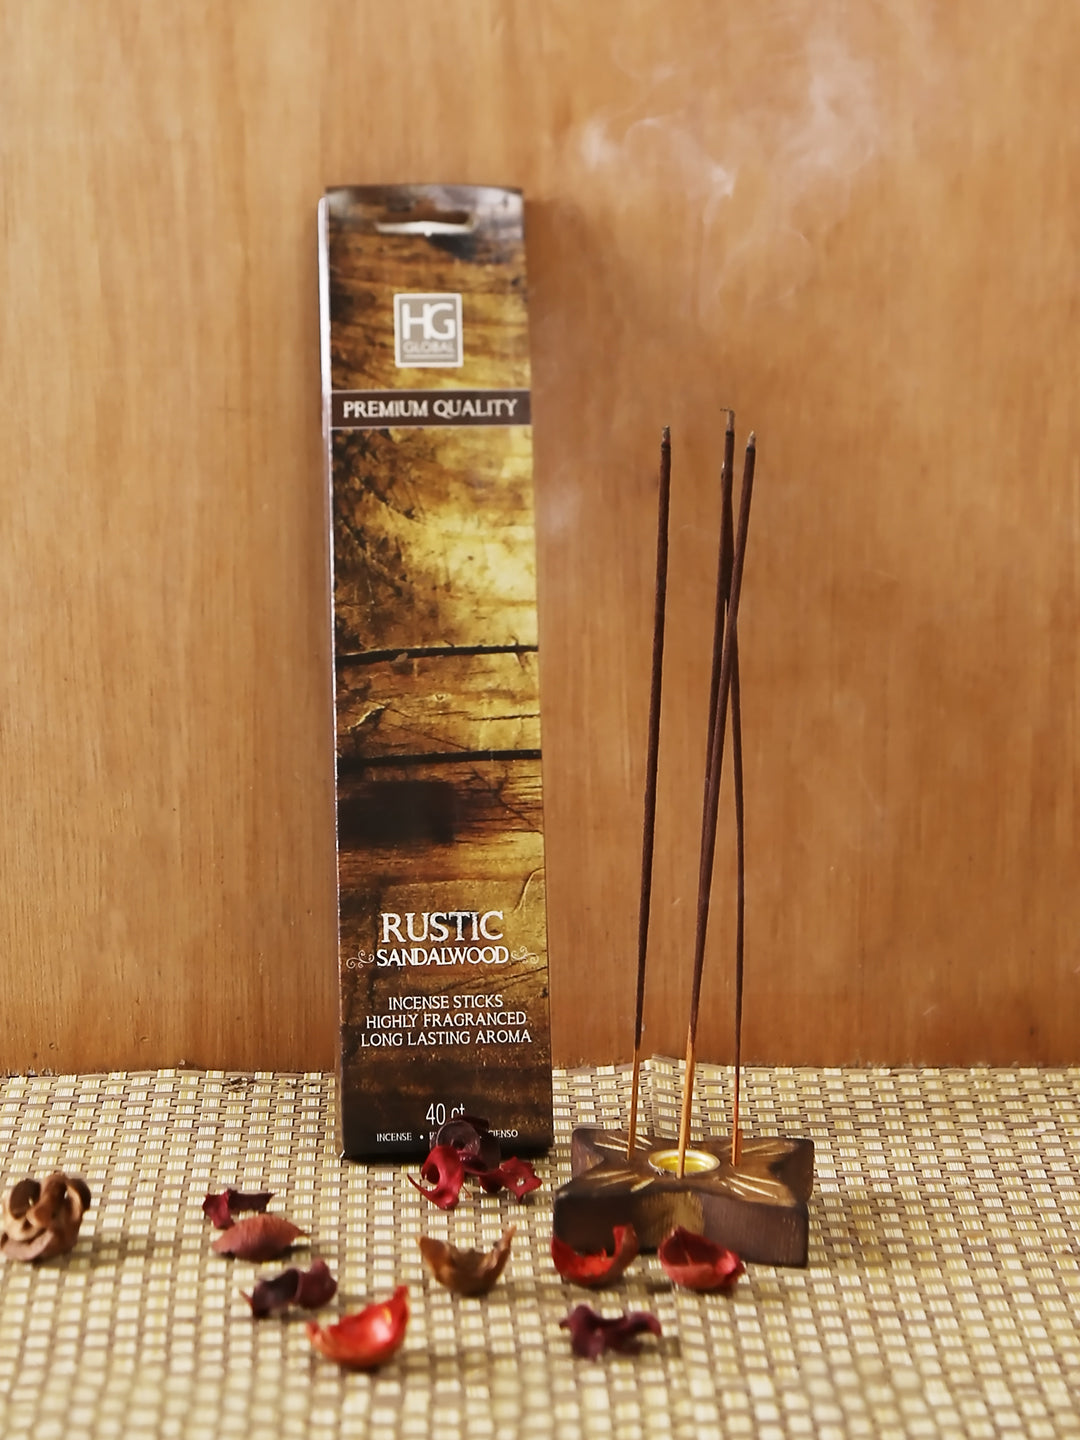 Set of 240 Highly Fragranced Hosley® Rustic sandalwood Incense Sticks (packed in forty piece count boxes) with bonus Decorative Butterfly Shaped Wooden Holder